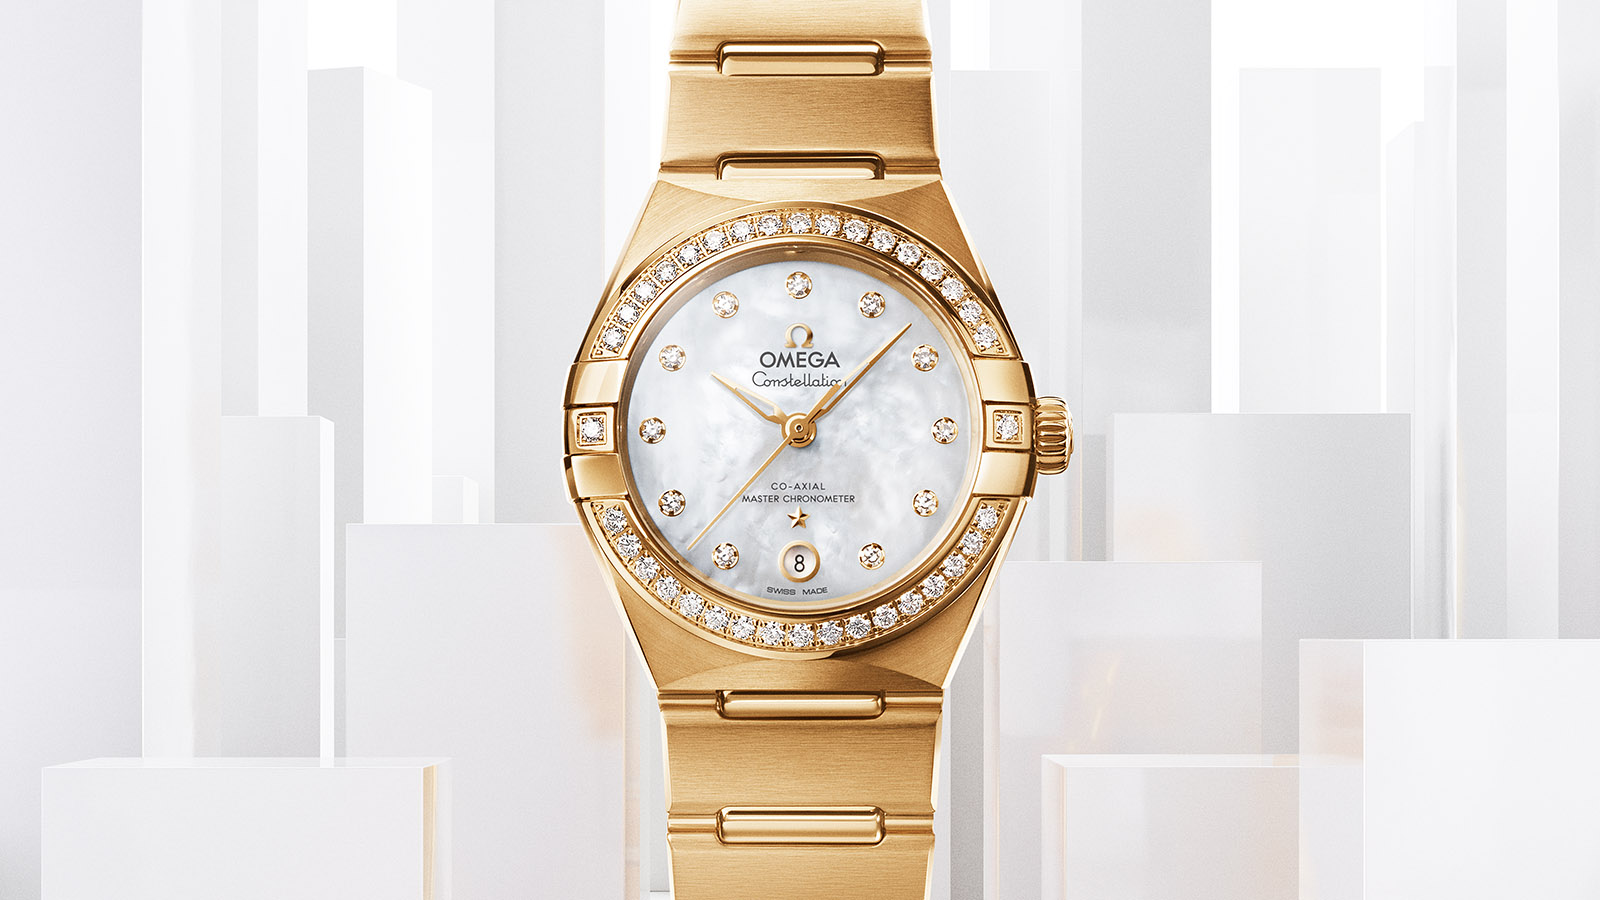 The gold replica watches have white mother-of-pearl dials.